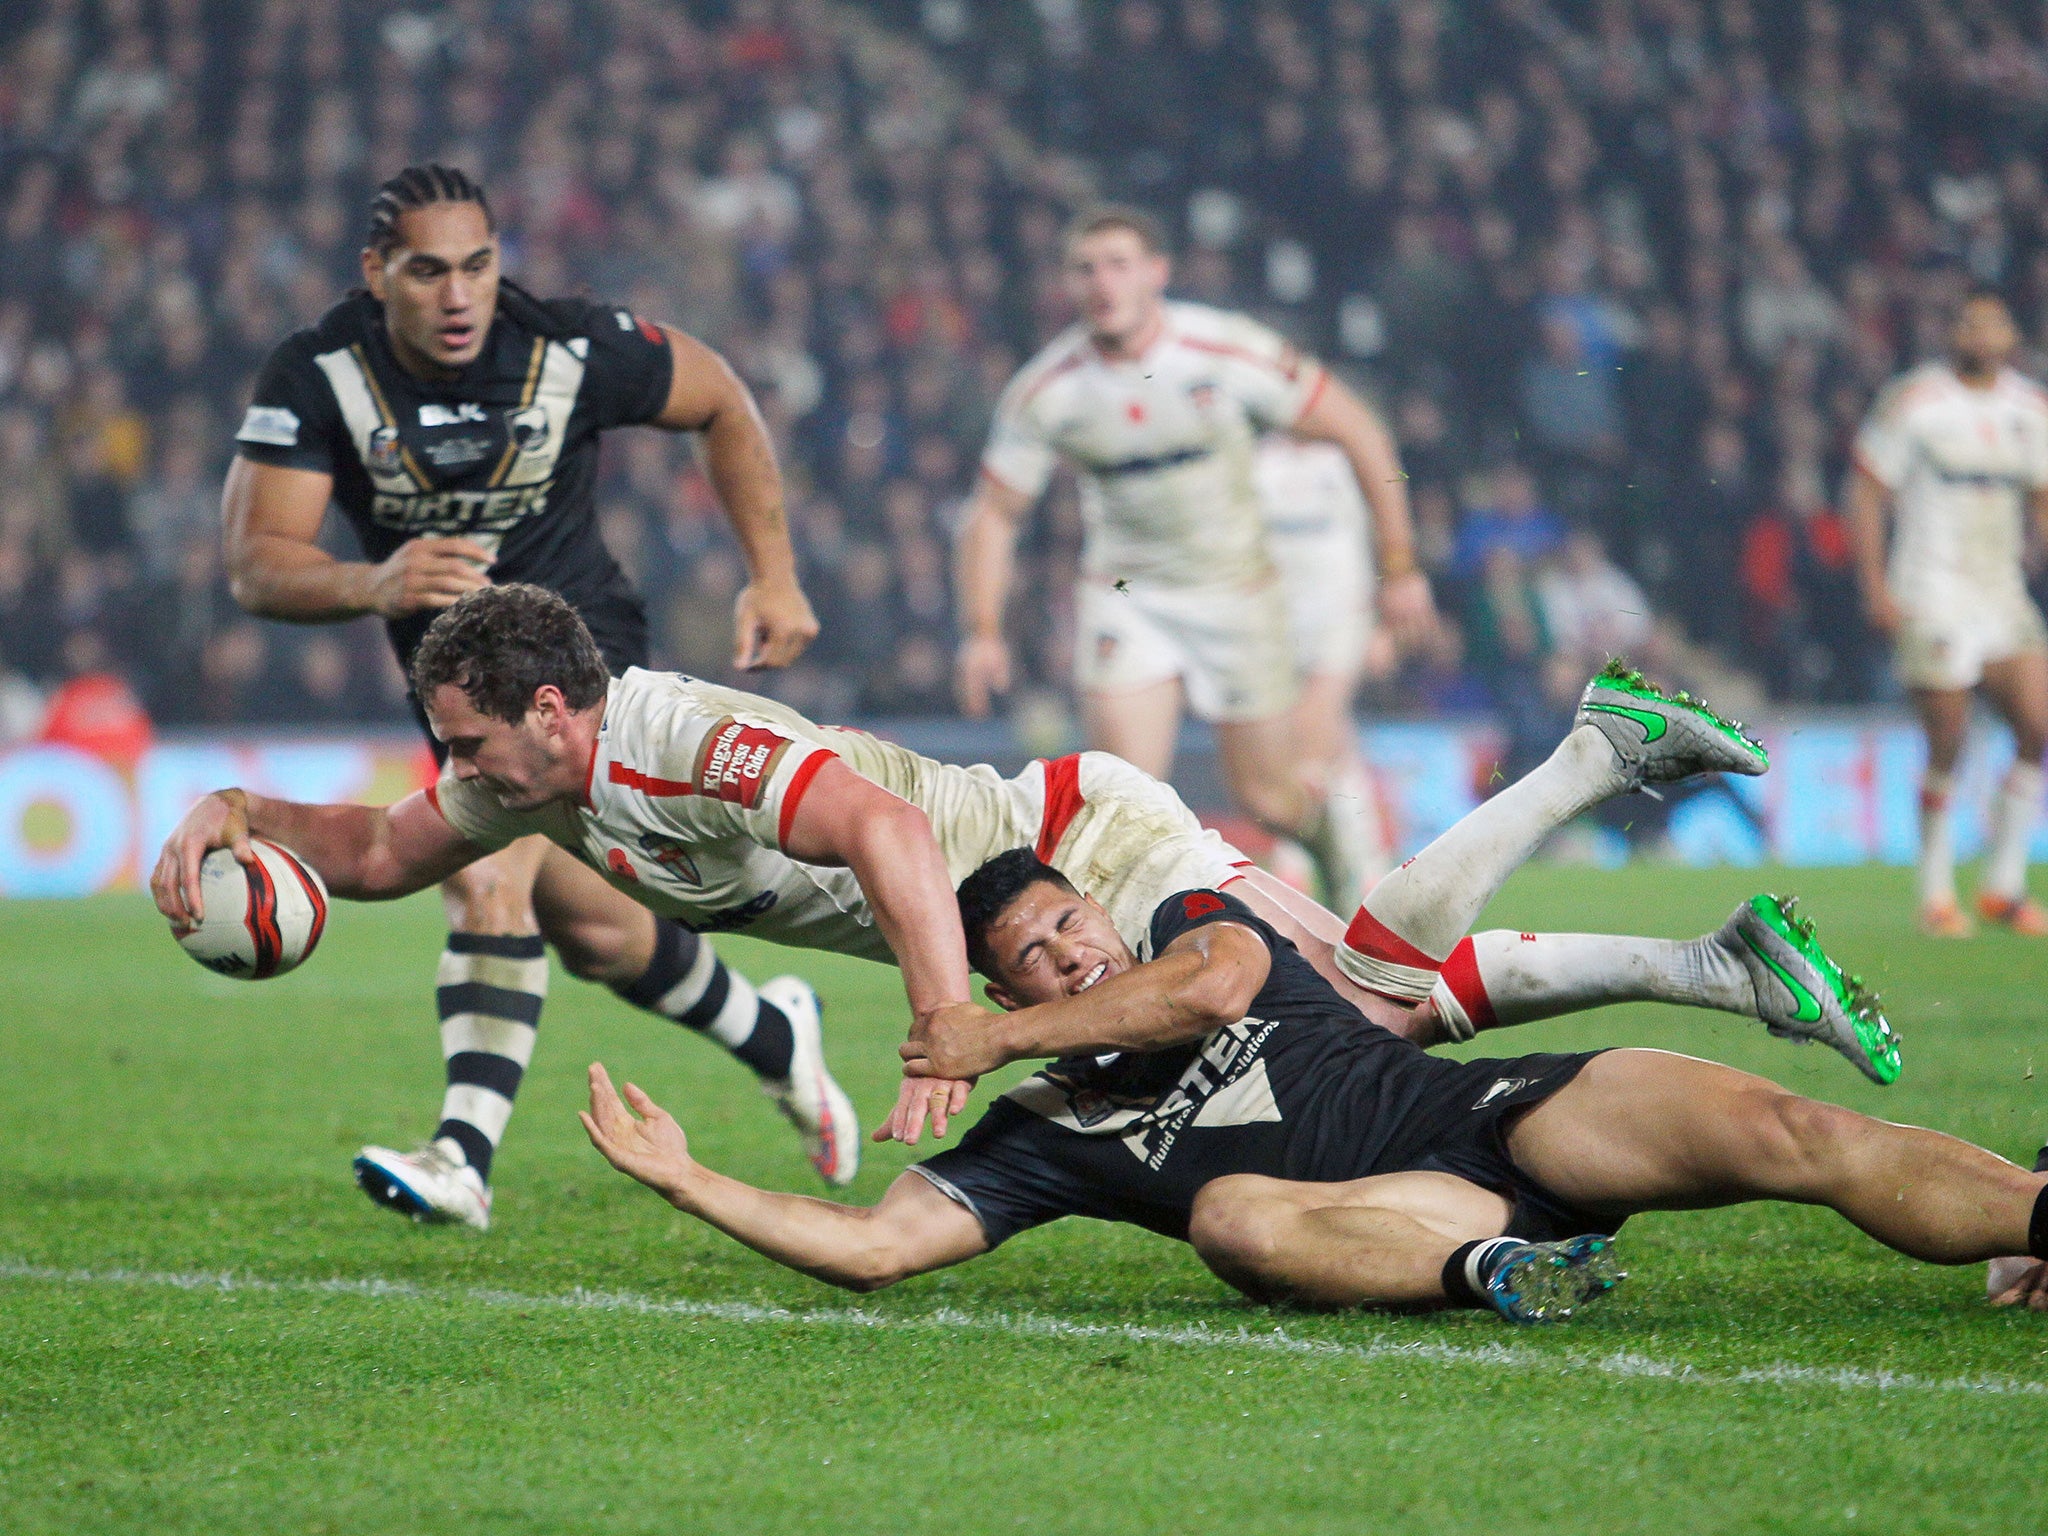 Sean O’Loughlin scores England’s fourth try to make the game safe against New Zealand at the KC Stadium